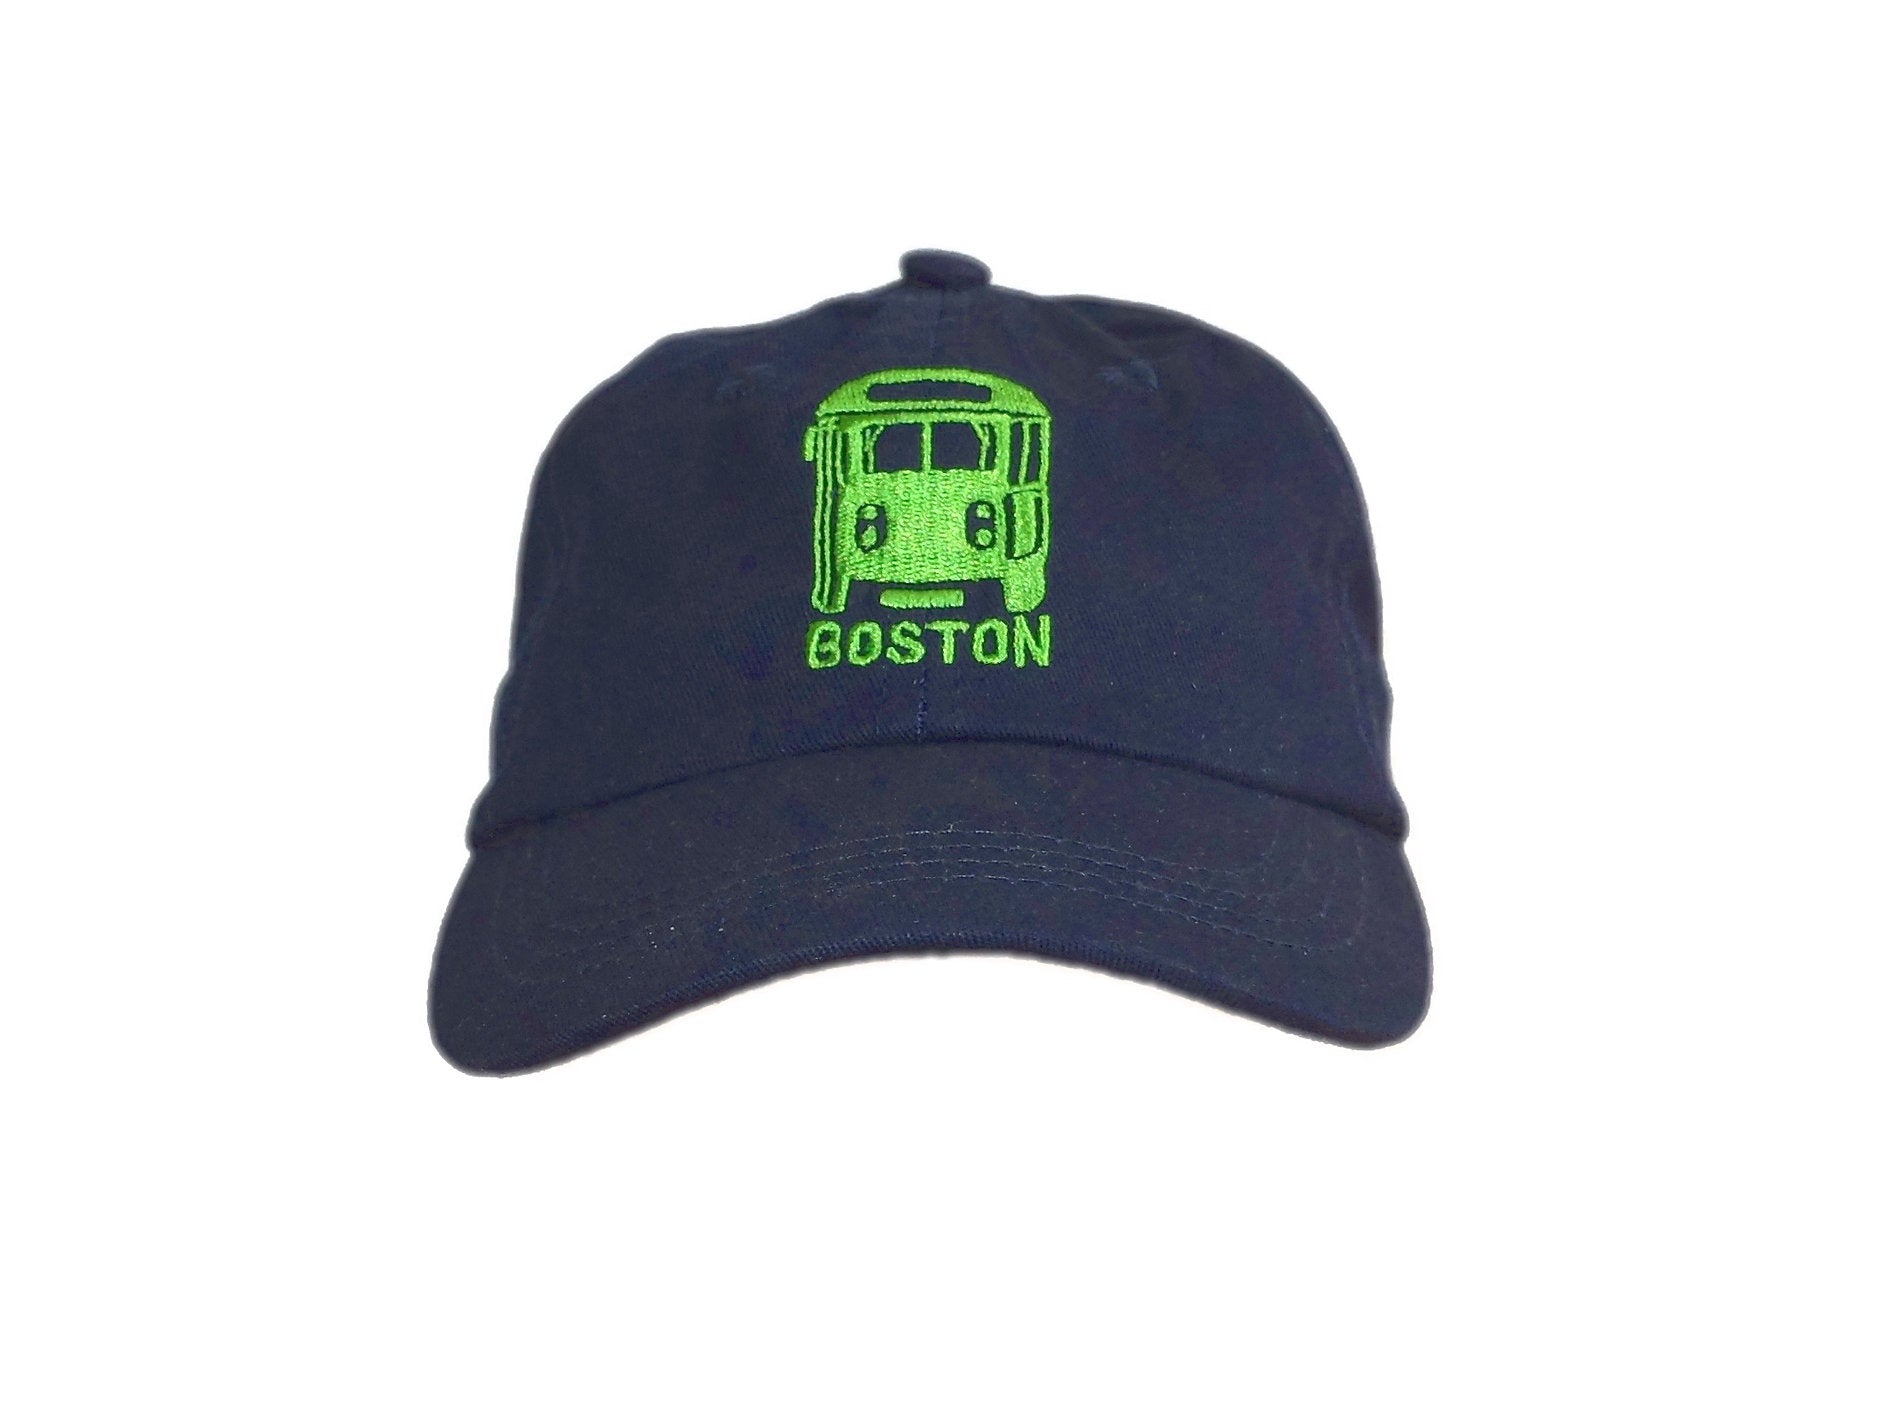 Kids' Navy Blue Baseball Cap with Bright Green Embroidered MBTA Green Line Trolley